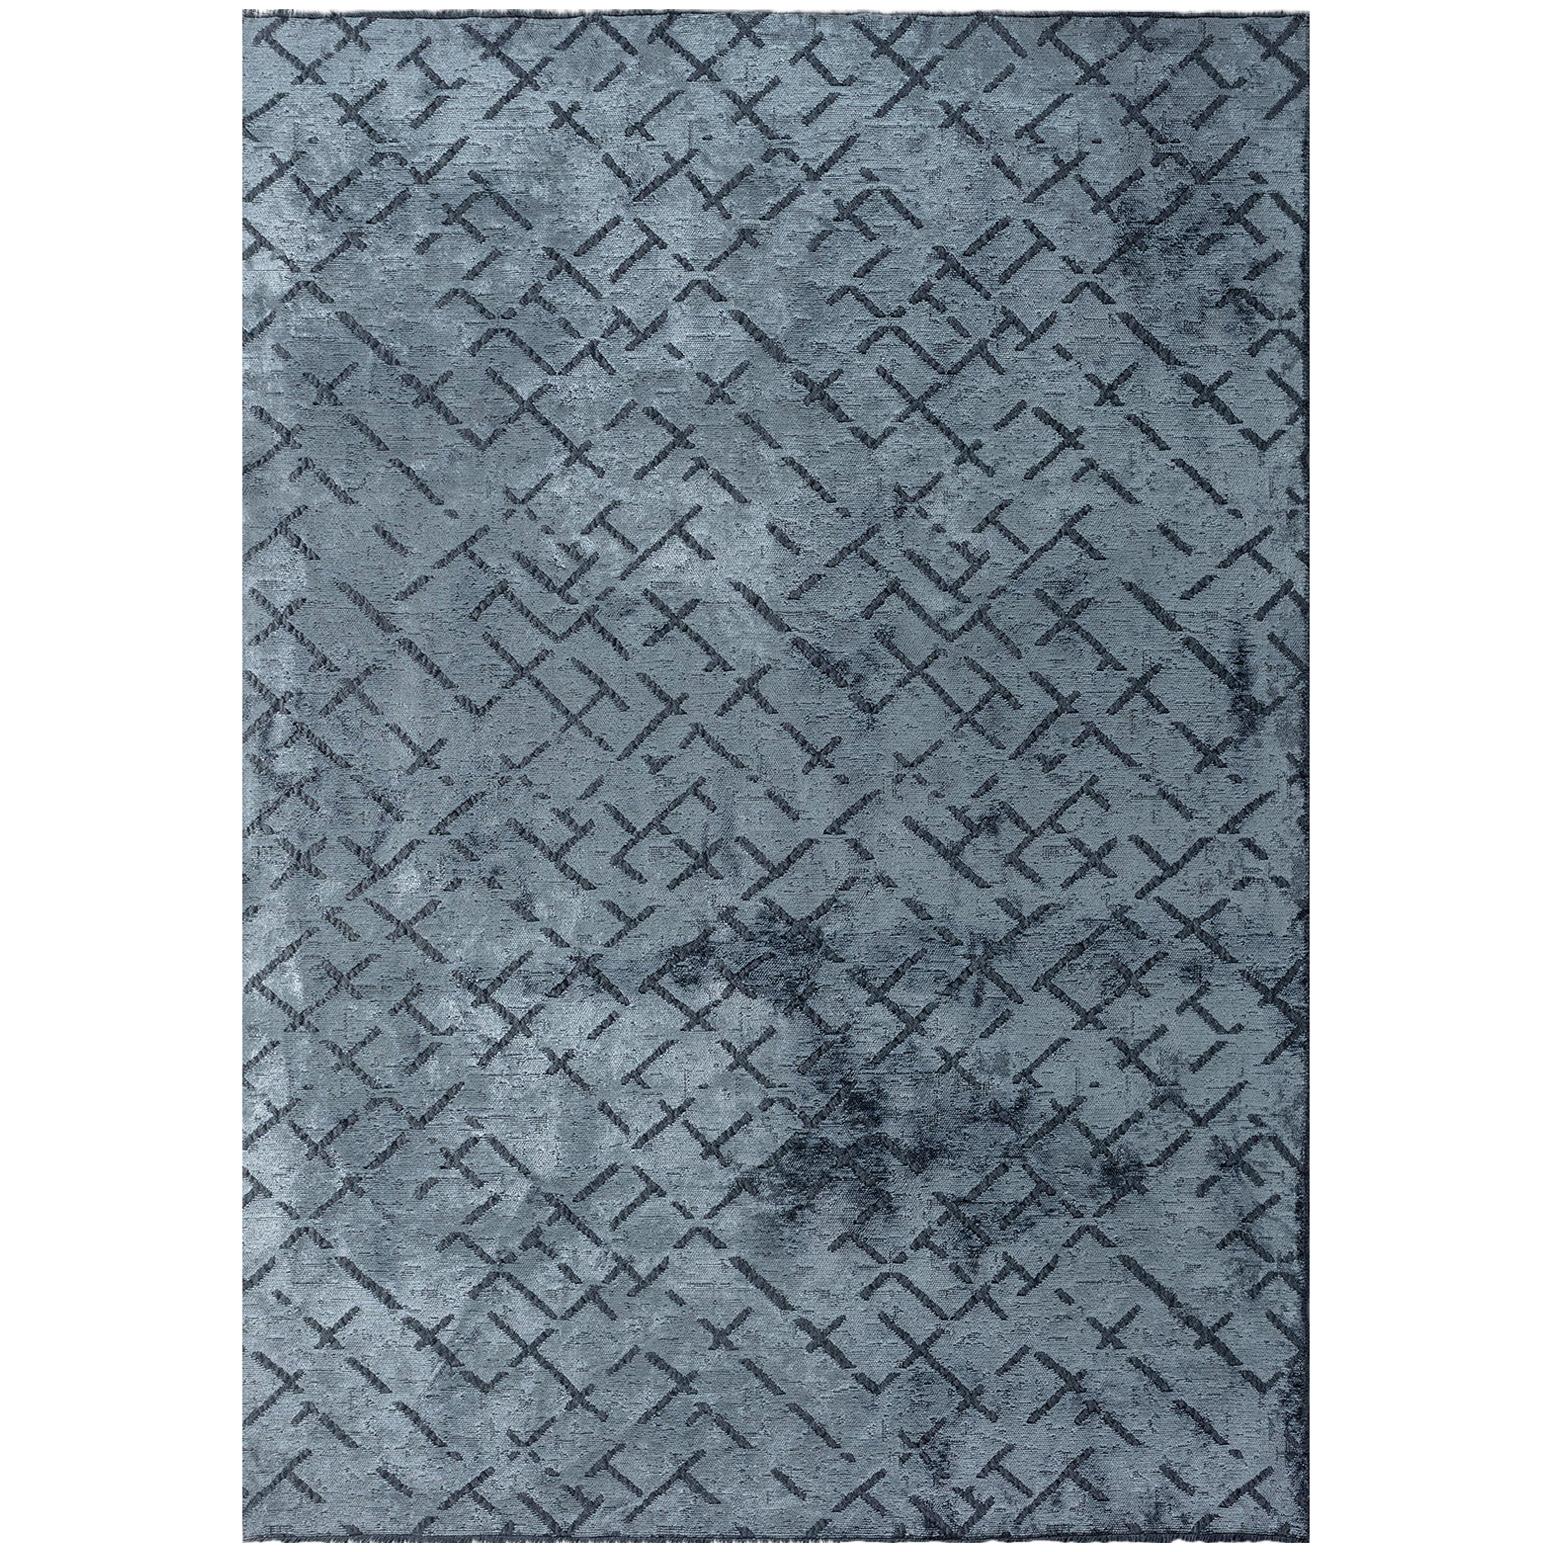 Modernist Light Blue Abstract Repeat Pattern Rug with or Without Fringe